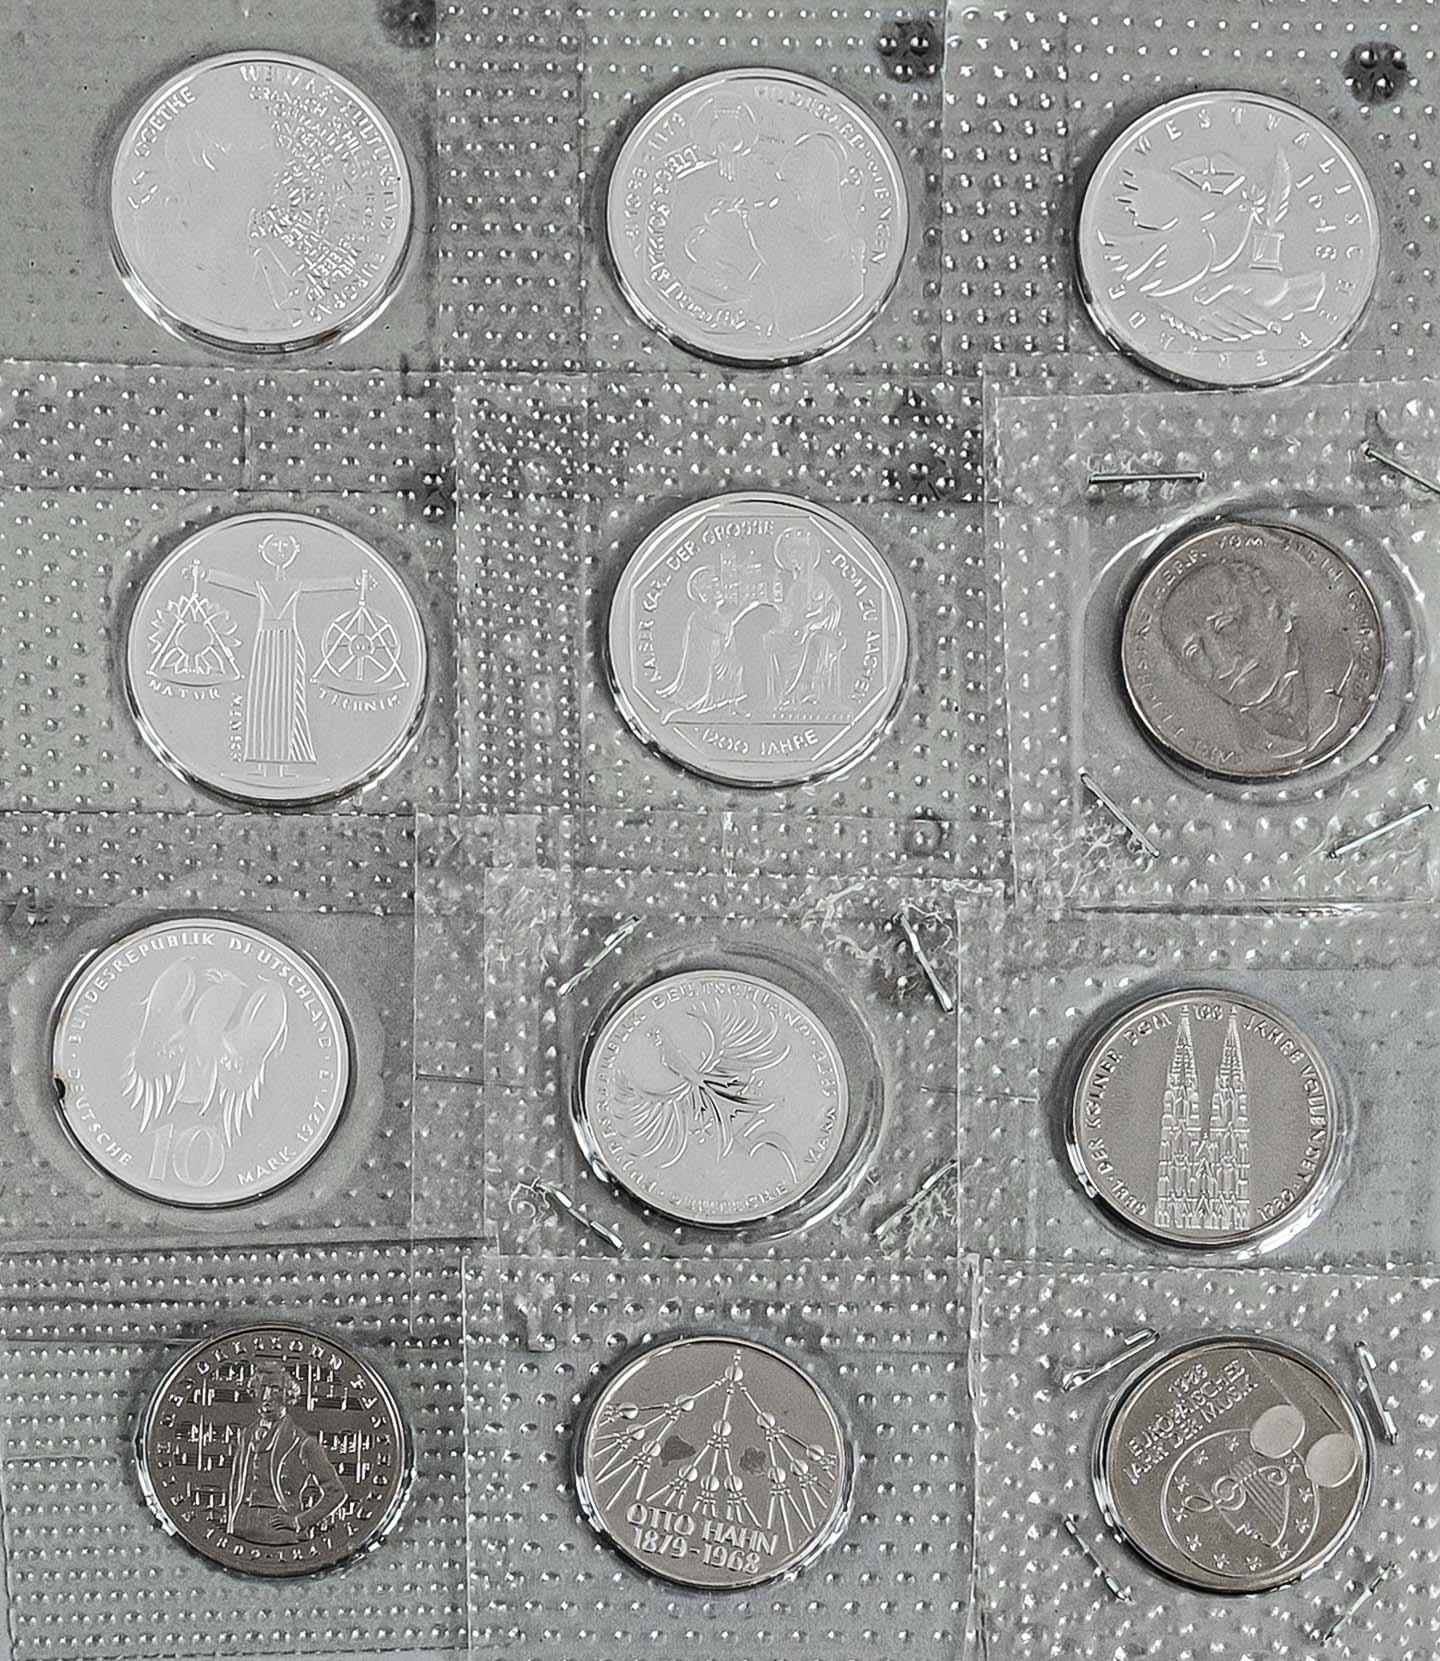 12 commemorative coins Federal Republic of Germany, 1984 - 2000, silver rubies 6 x 10 DM (i.a.